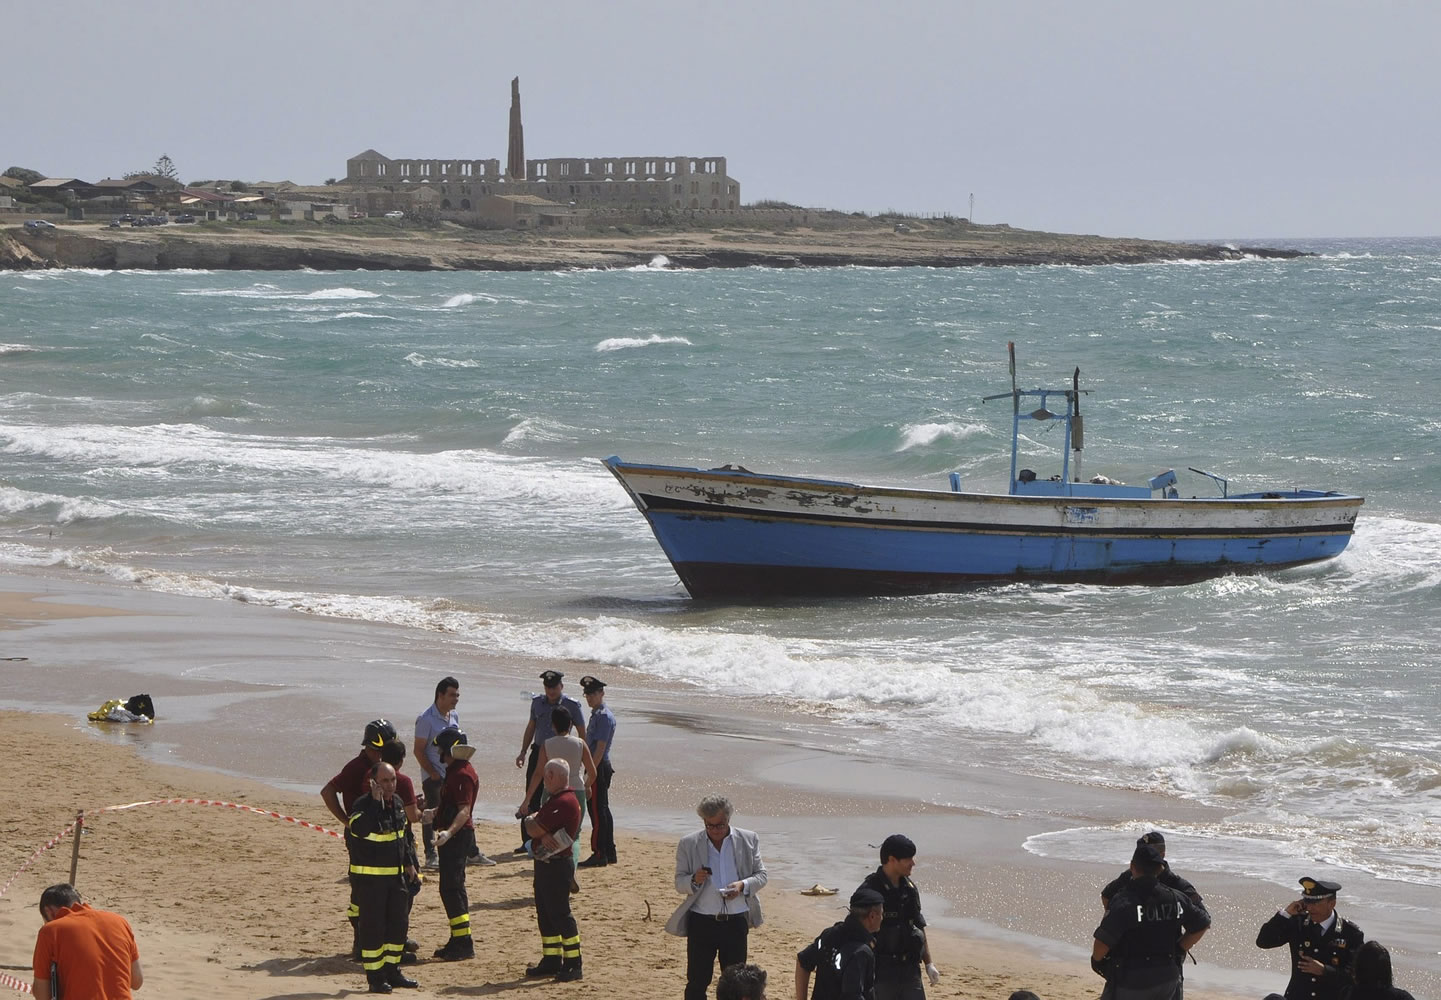 Police officers and firefighters stand by the boat, in background, that carried a group of migrants, after many drowned as they tried to reach the shore in Scicli, Sicily, Italy, in 2013.